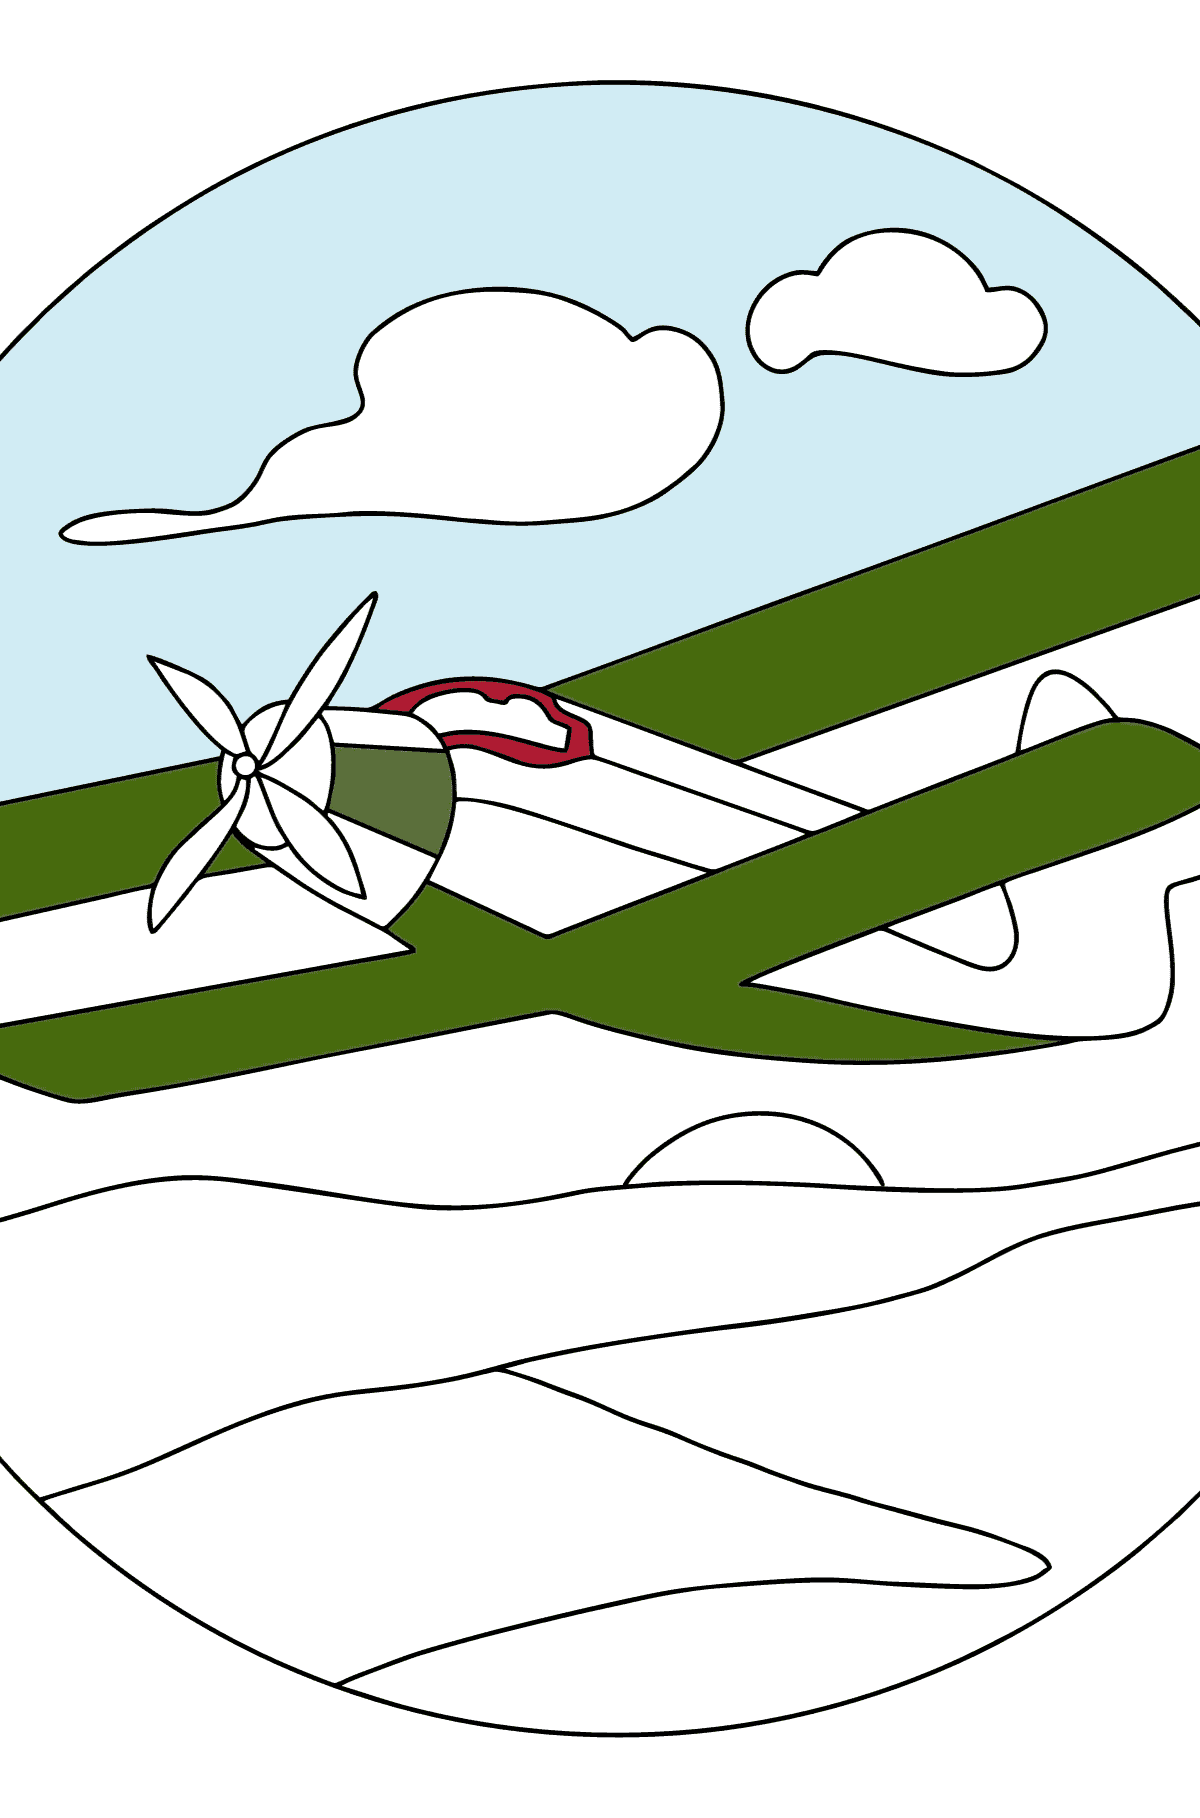 Airplane Biplane Coloring Page - Coloring Pages for Kids